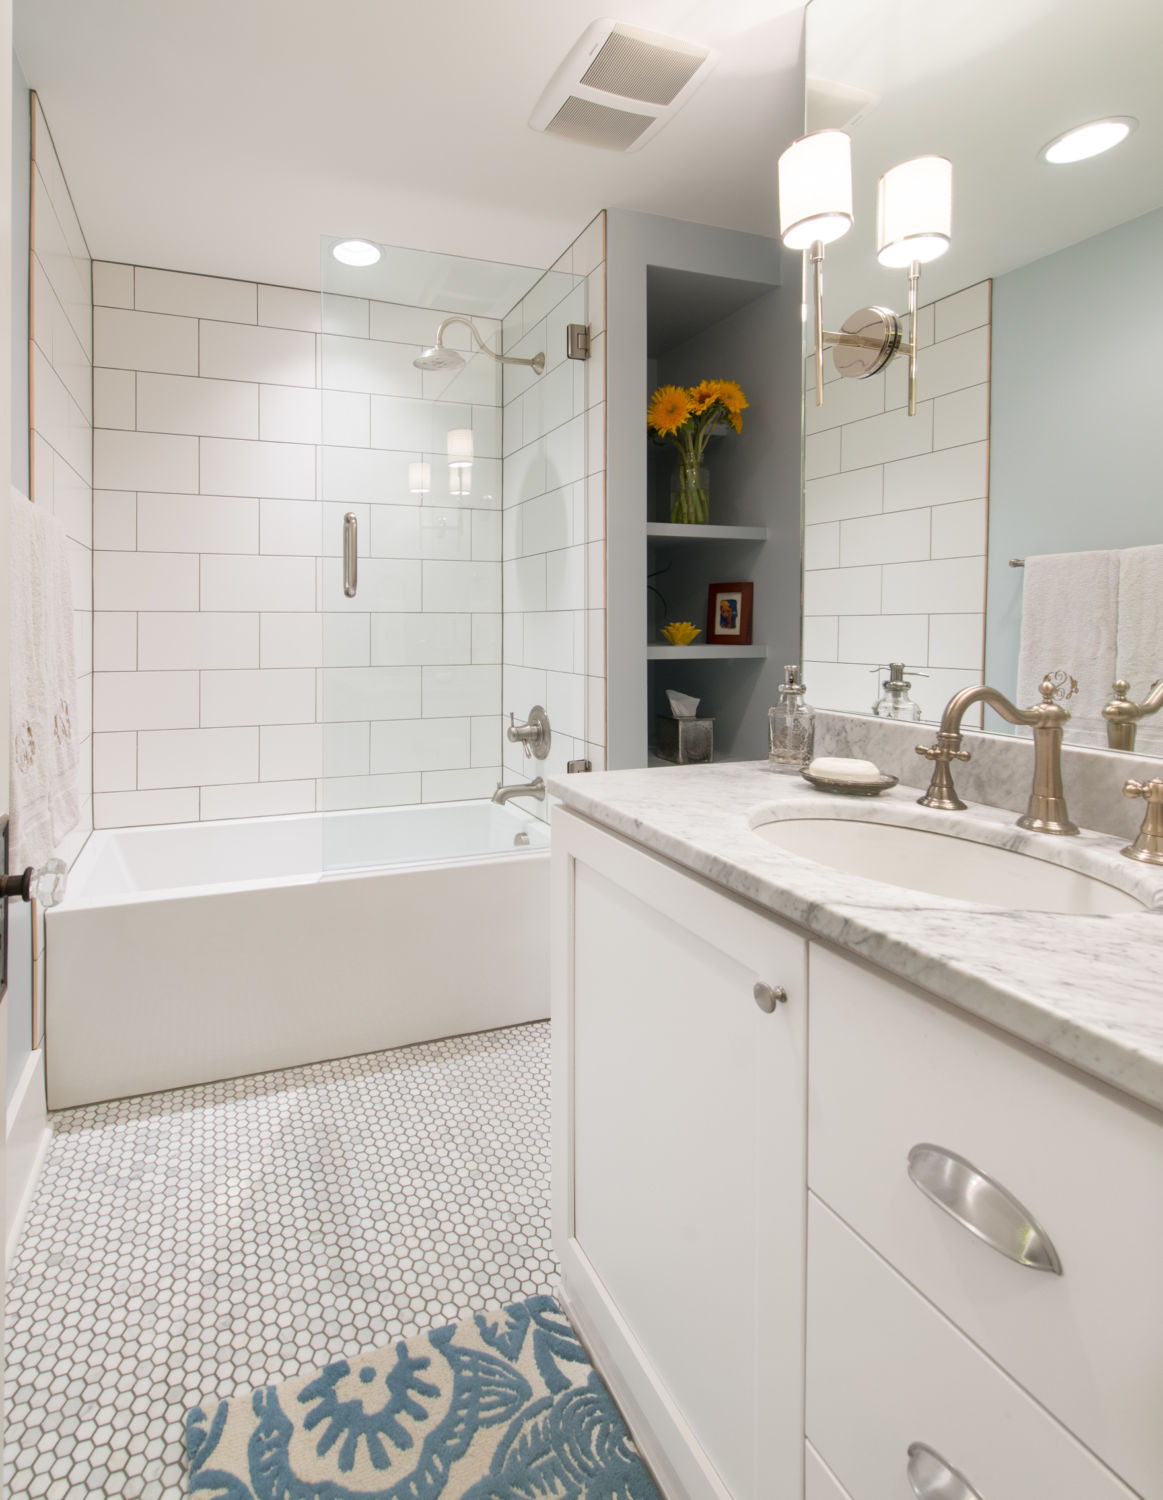 HighCraft-Builders-classic-white-bathroom-remodel-hex-floor-subway-tile-shower-wall-marble-counter